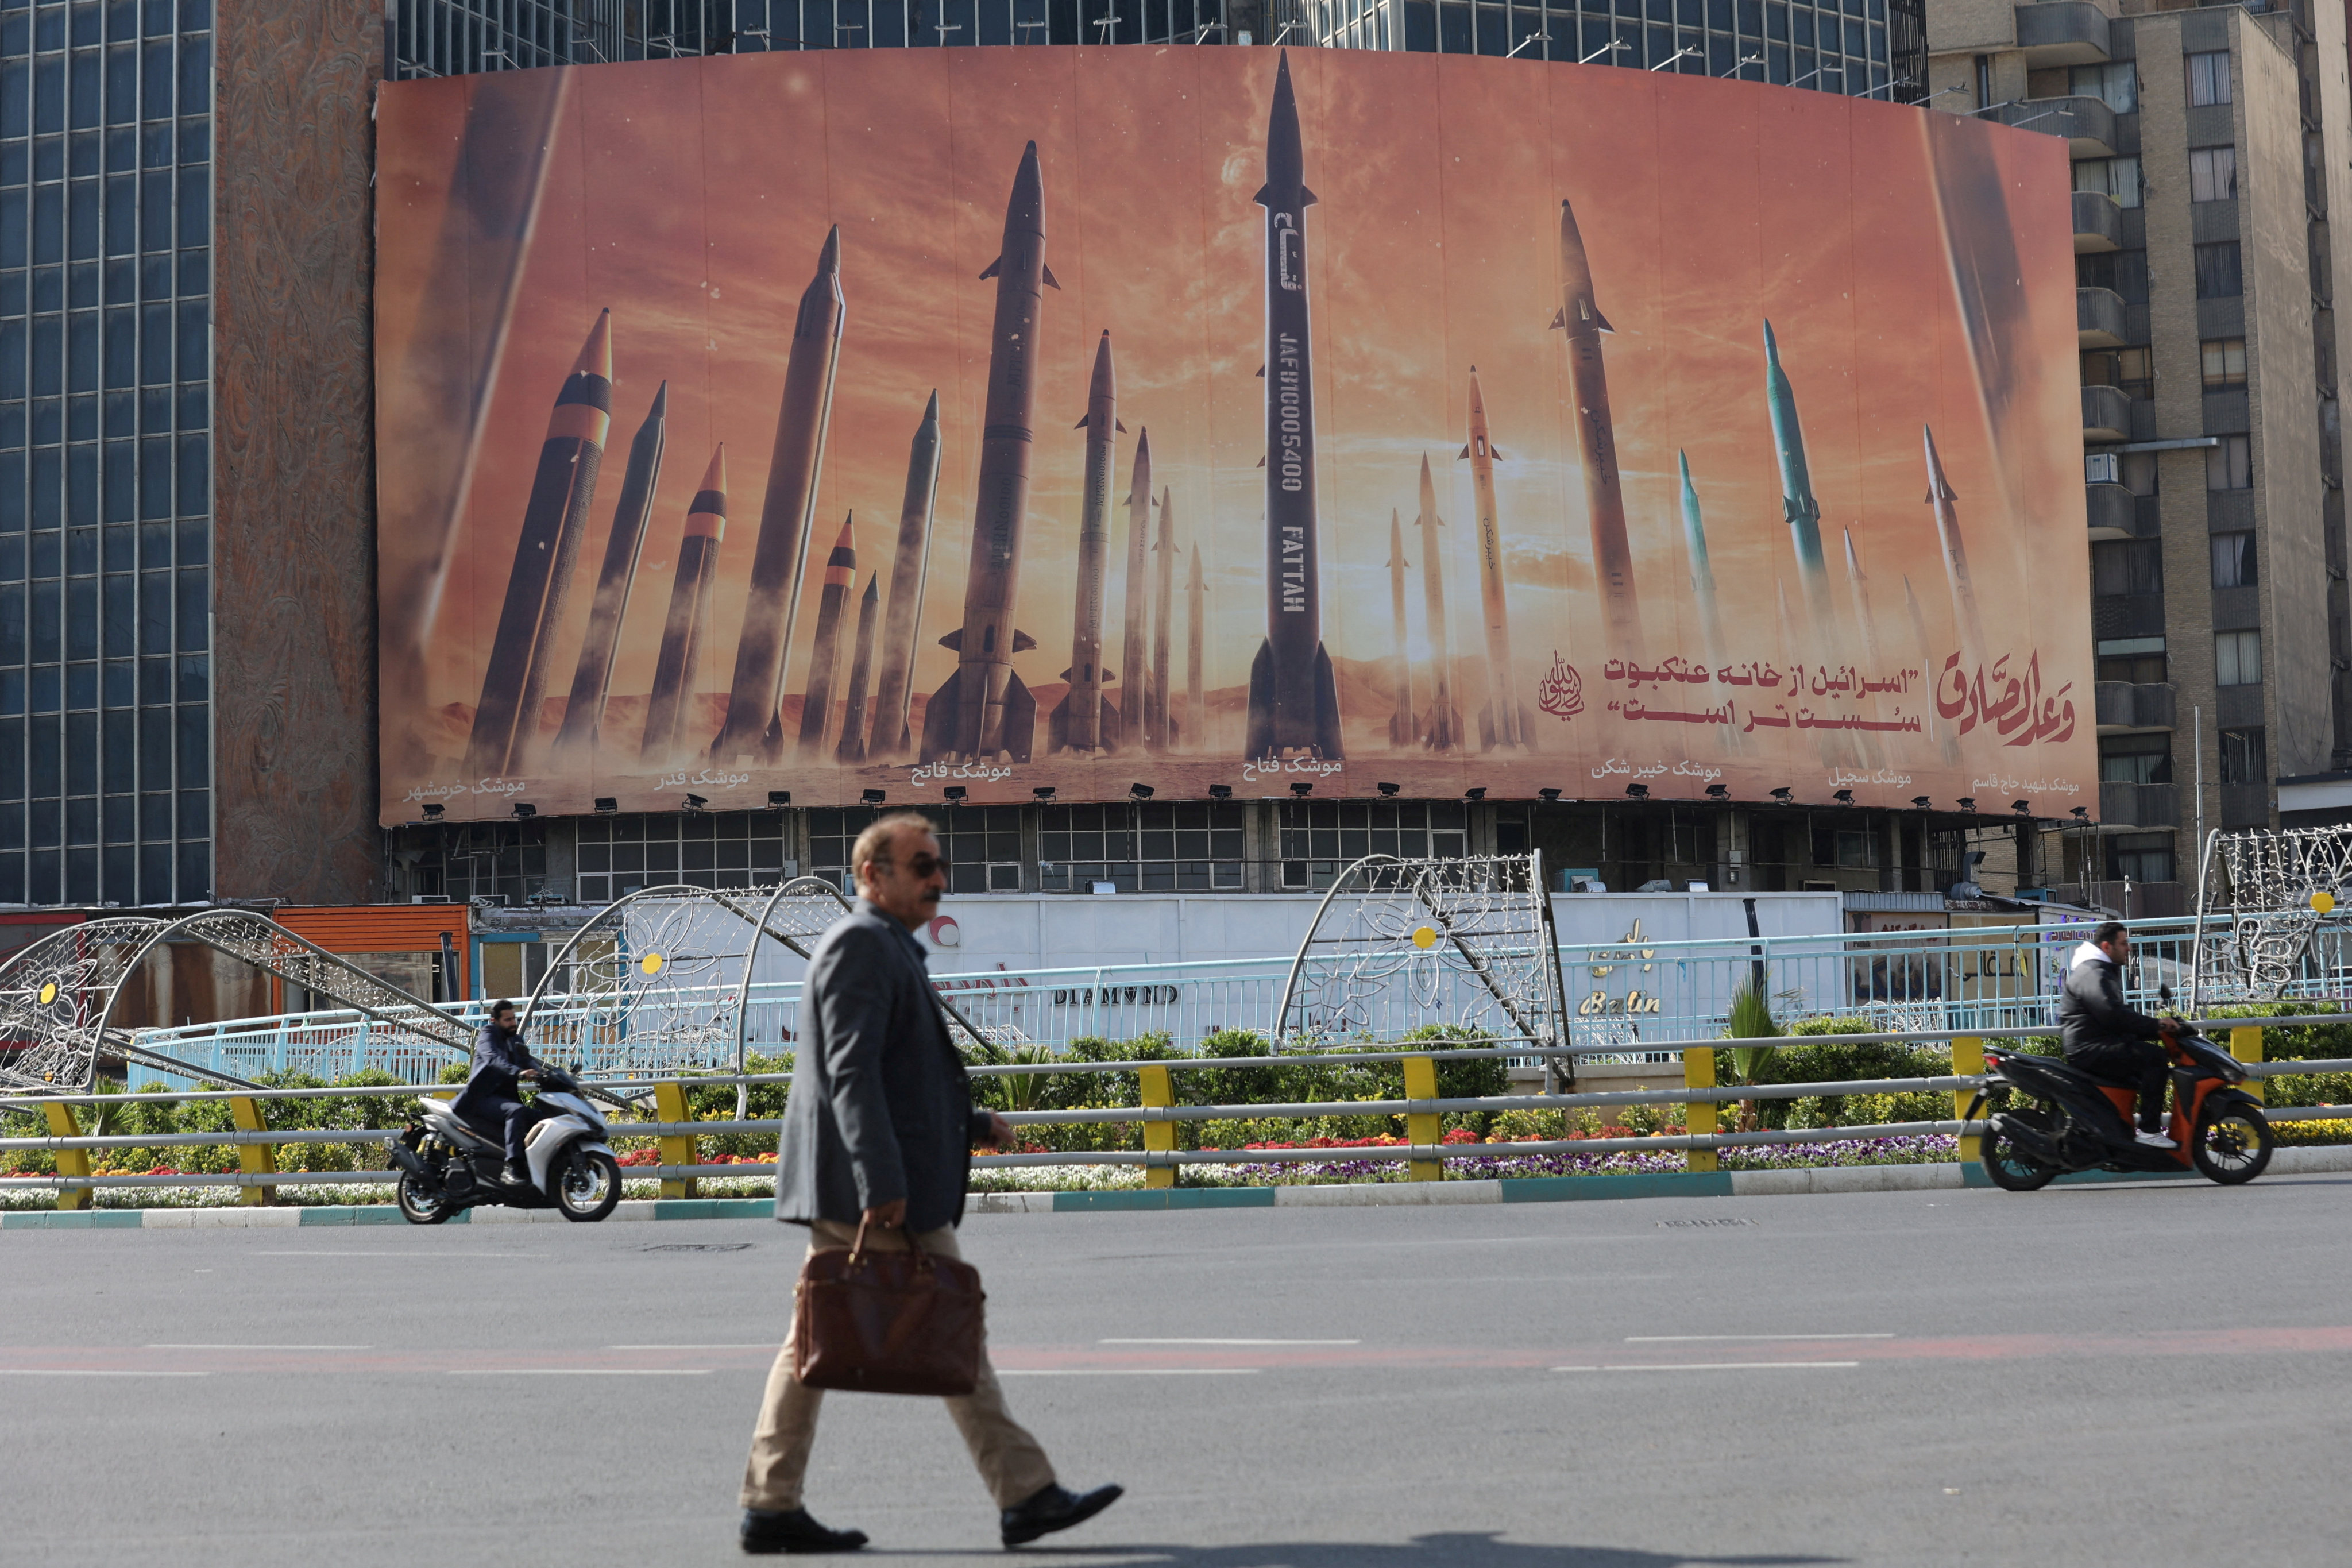 A billboard featuring missiles in Tehran. Iran shot down several drones over the central city of Isfahan early Friday. Photo: WANA via Reuters